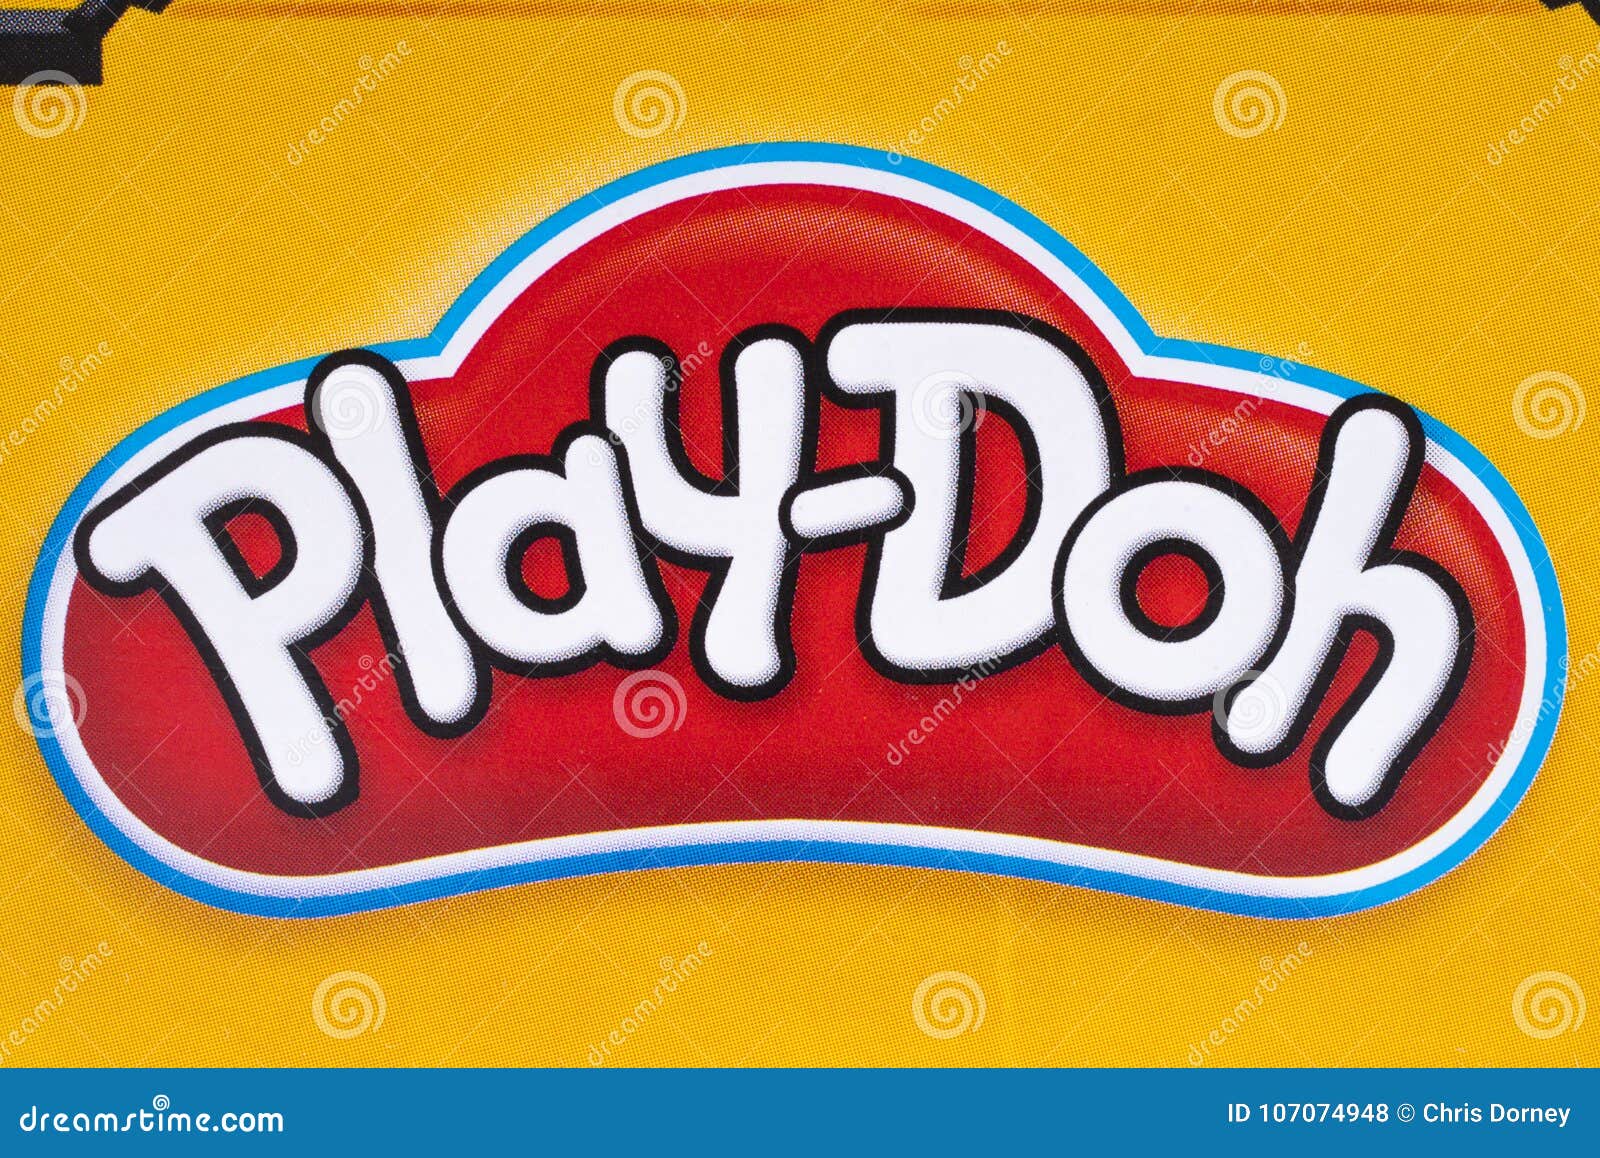 https://thumbs.dreamstime.com/z/london-uk-december-th-close-up-play-doh-logo-packaging-one-its-products-product-owned-manufactured-hasbro-107074948.jpg